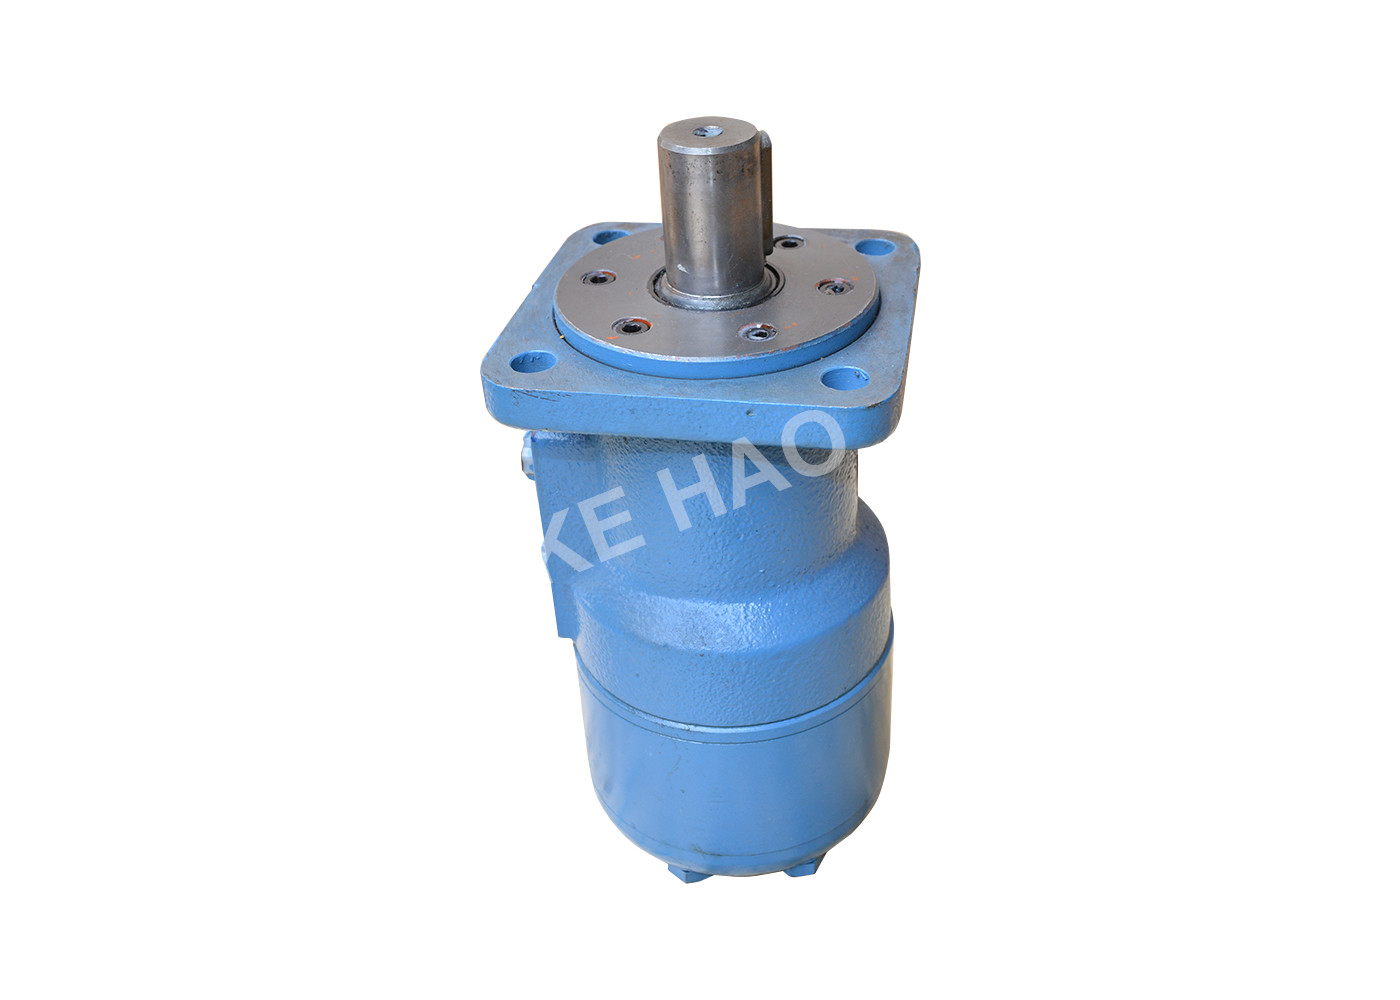 Quality BM1-200 BM1-250 Cycloidal Gear Motor / Industry Excavator Pump Parts for sale